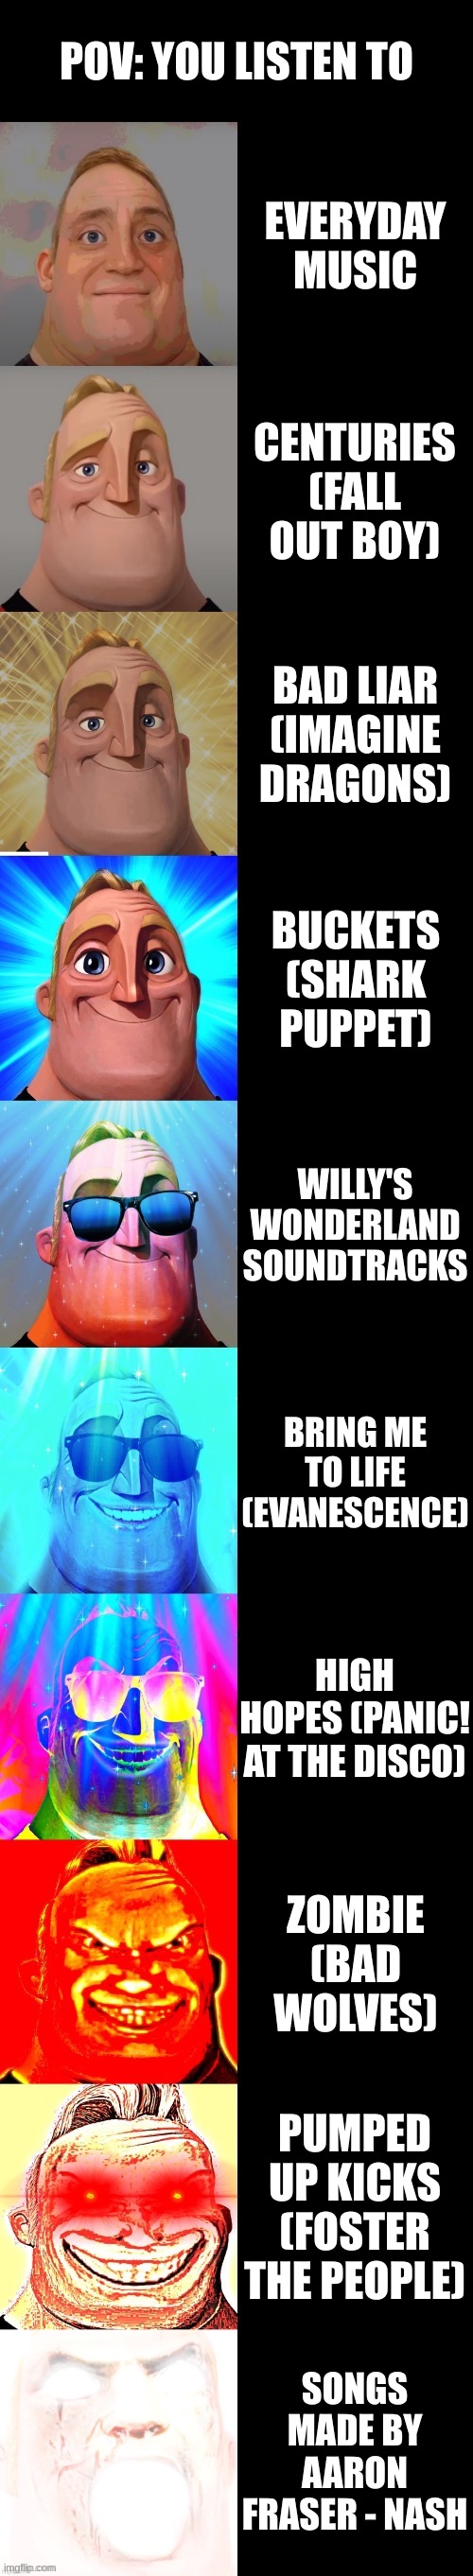 Mr. Incredible becomes uncanny music edition : r/musicmemes